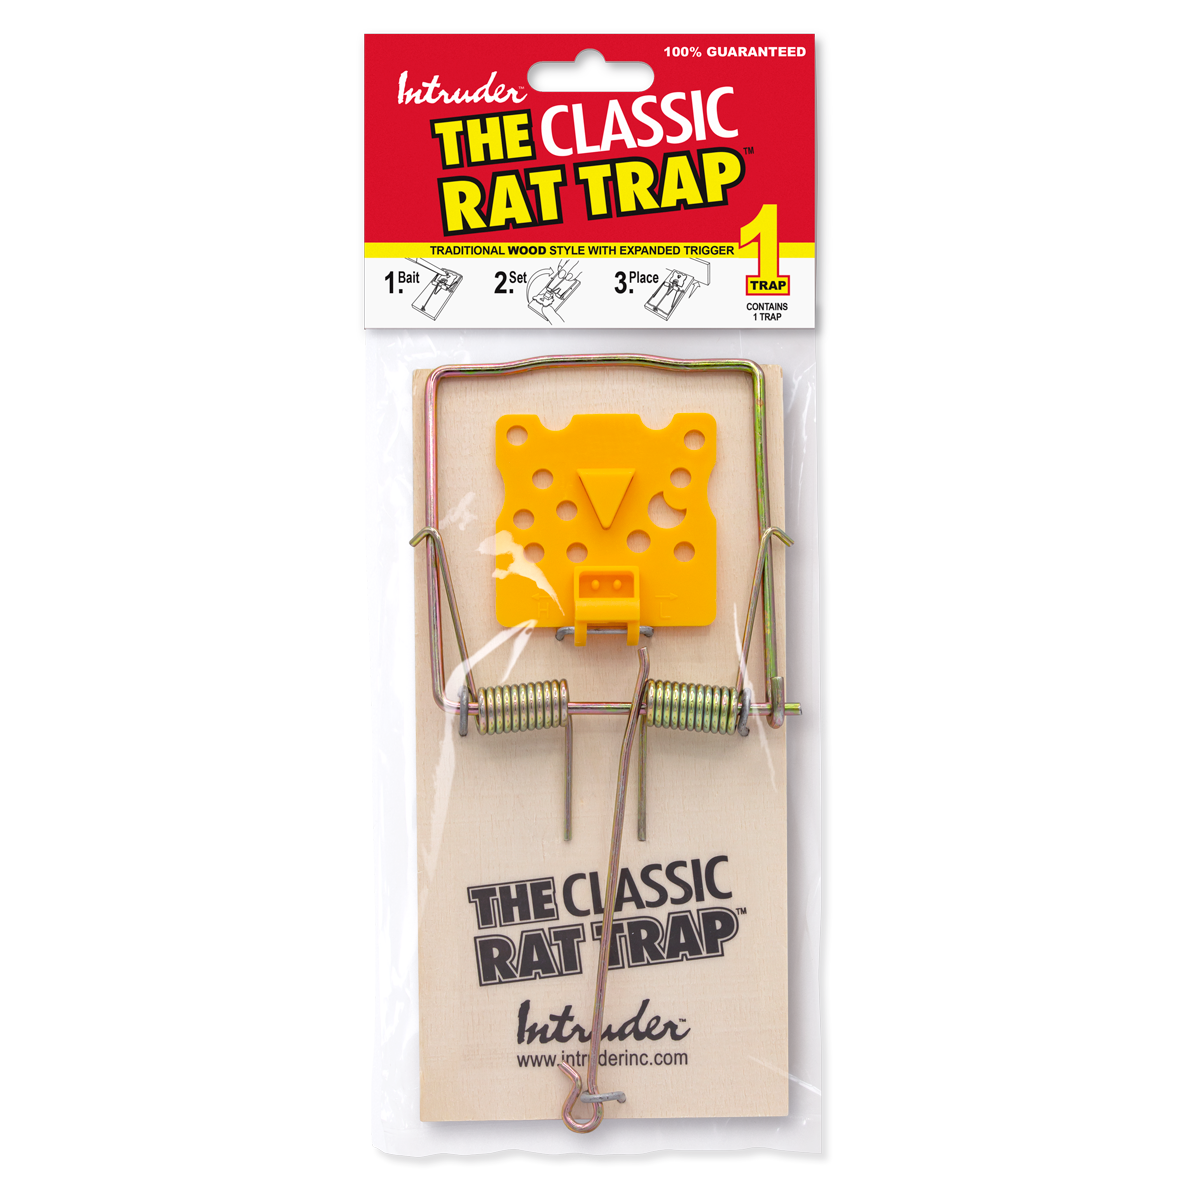 PIC Wood Traps (Wood Mouse Traps - 2 Count)